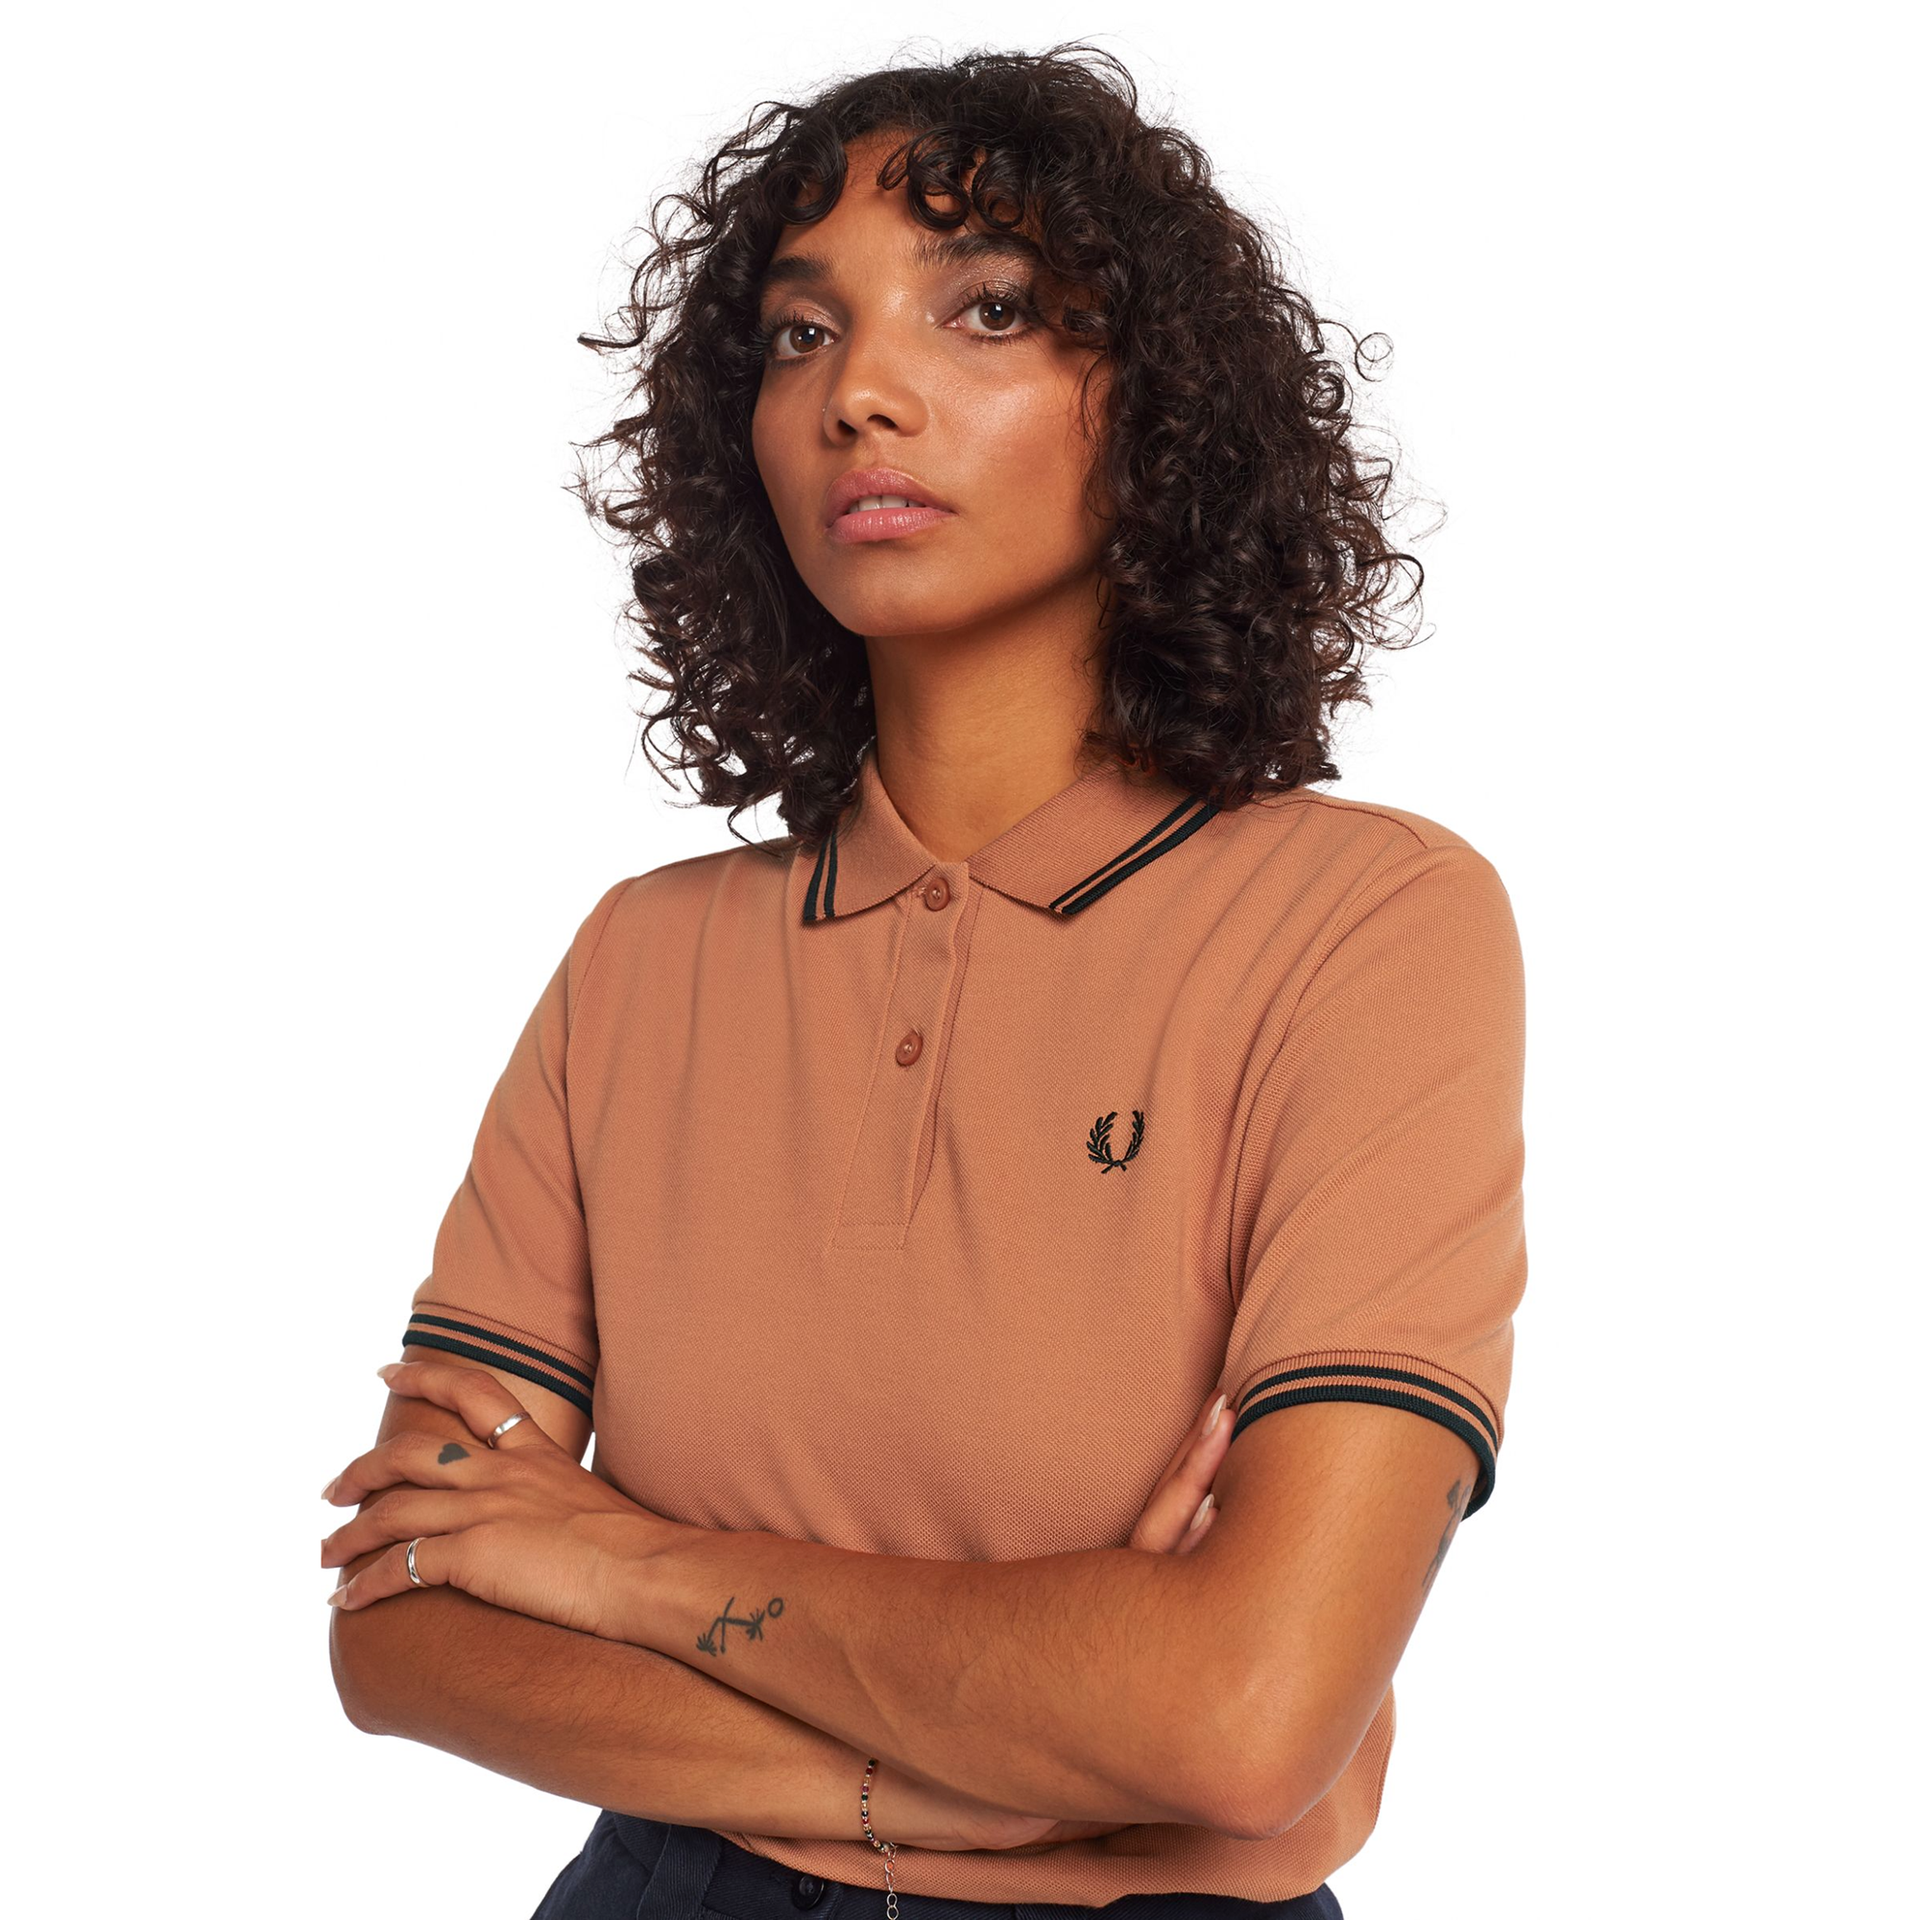 Verkeersopstopping periode slaap FRED PERRY GIRLS TWIN TIPPED POLO COURT CLAY/BLACK